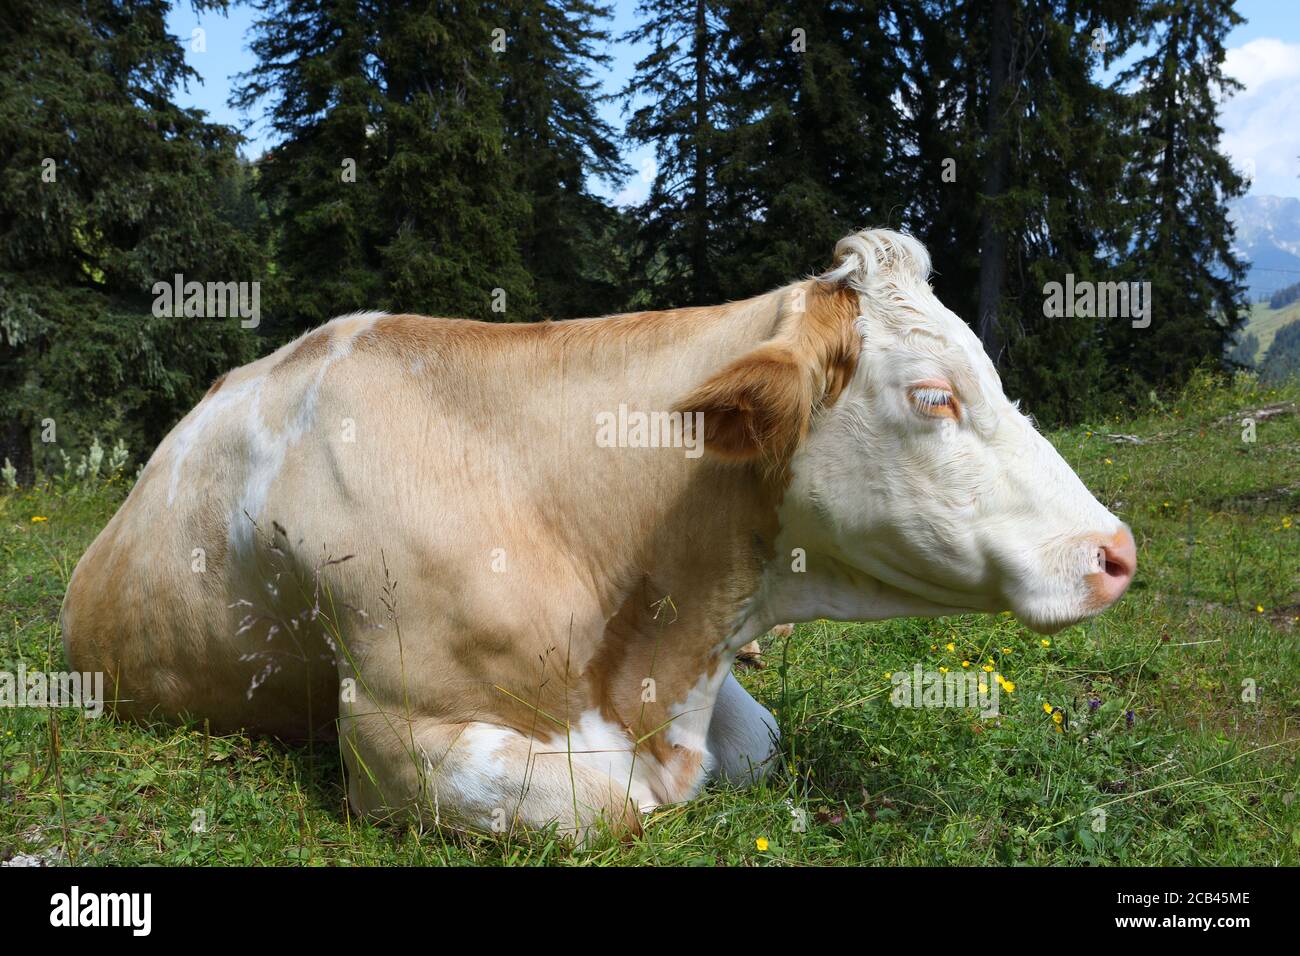 Red and white cow with long white eyelashes lying on alpine meadow in austrian alp with trees and mountains in background. Stock Photo